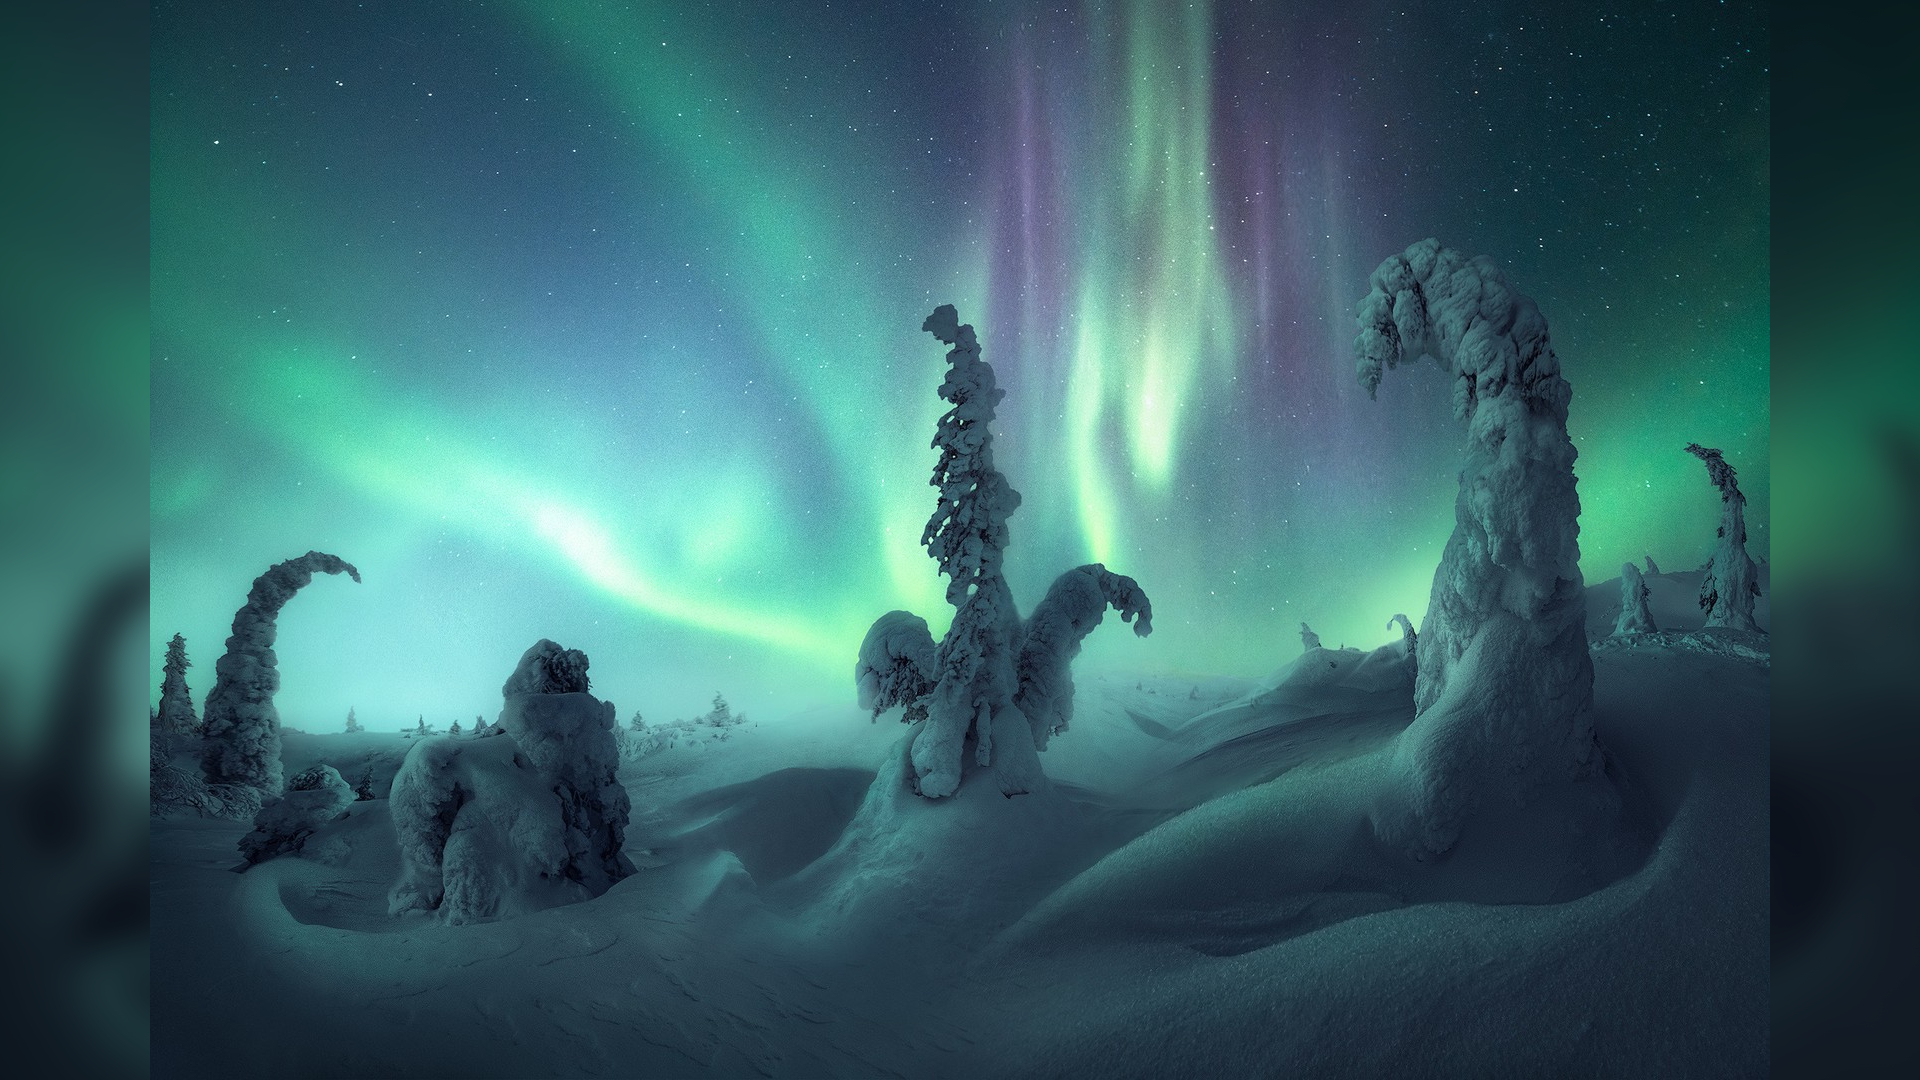 A photo of the northern lights, part of the travel photography blog Capture the Atlas 2022 Northern Lights Photographer of the Year collection. This image was taken by Nico Rinaldi.